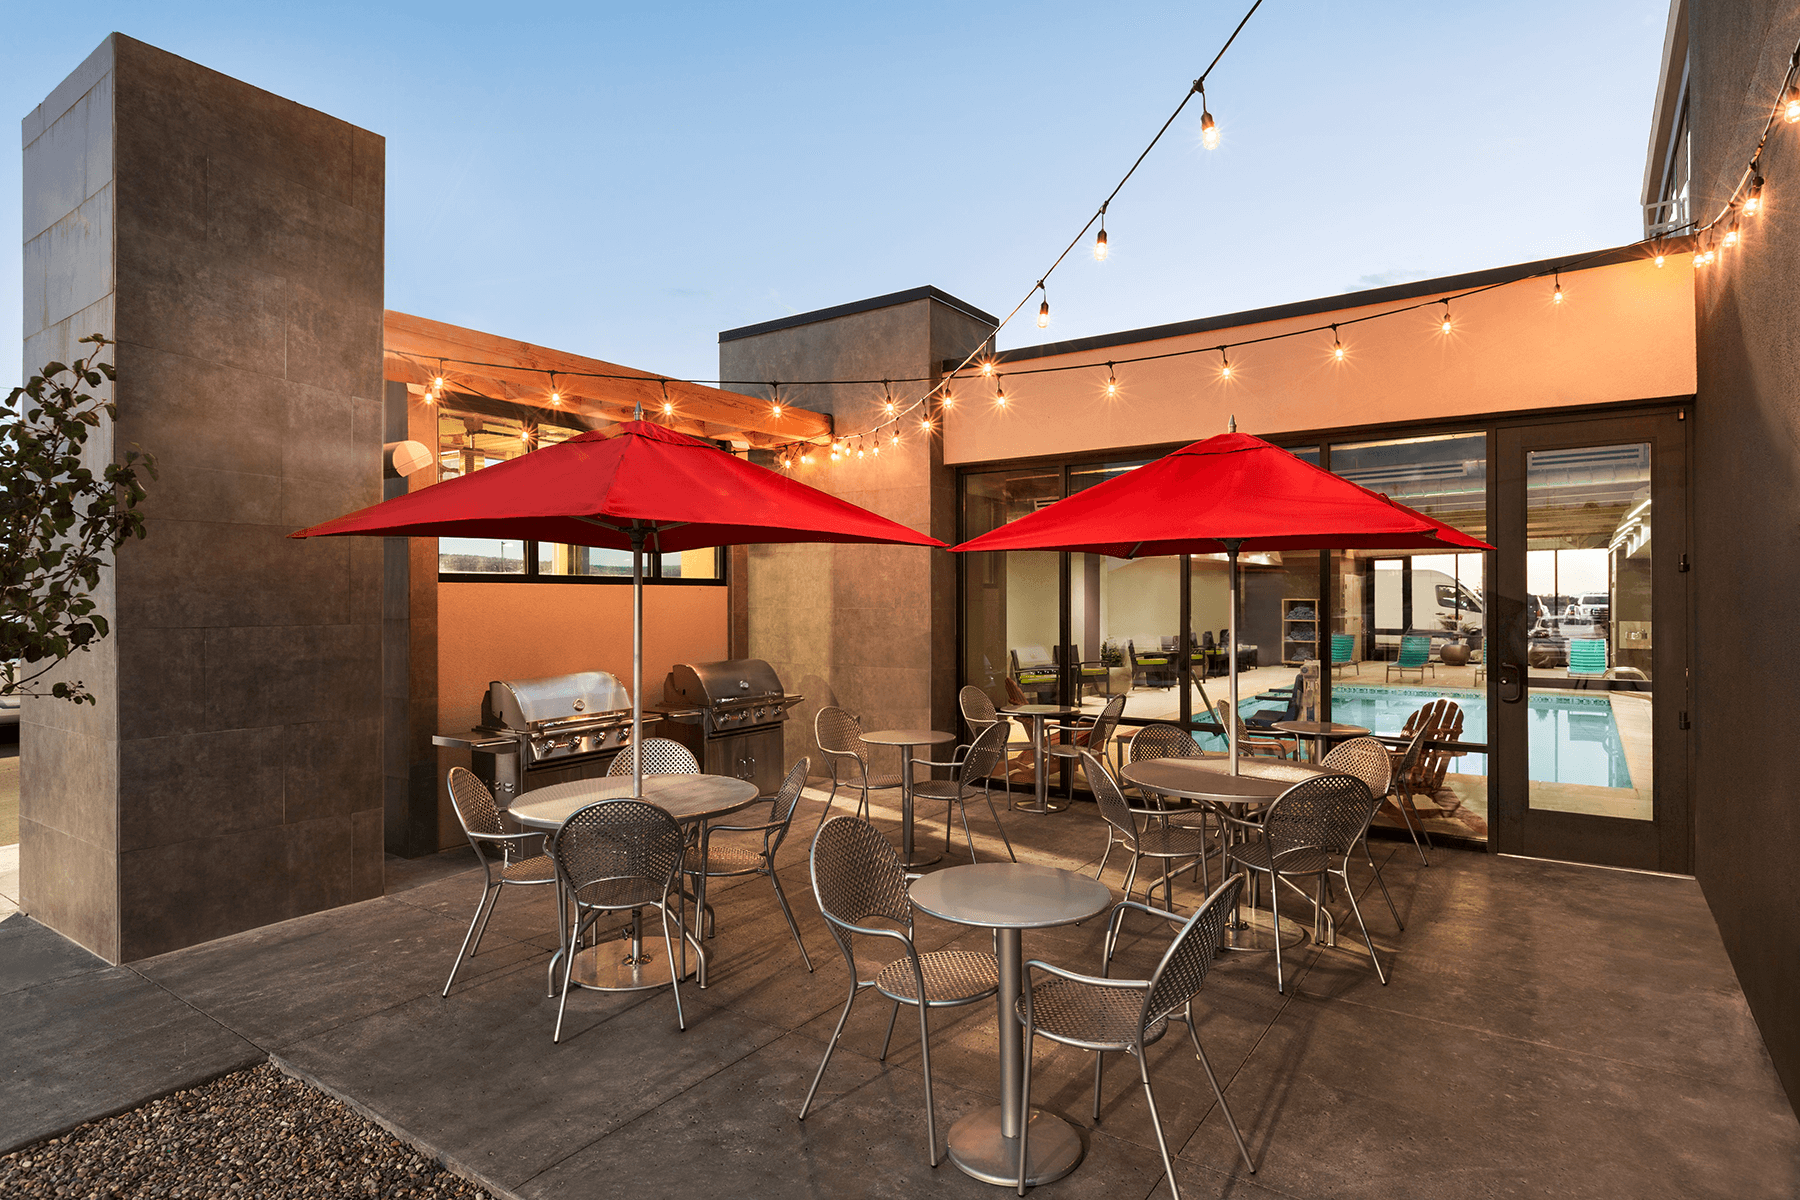  Home 2 Suites Patio with BBQs 